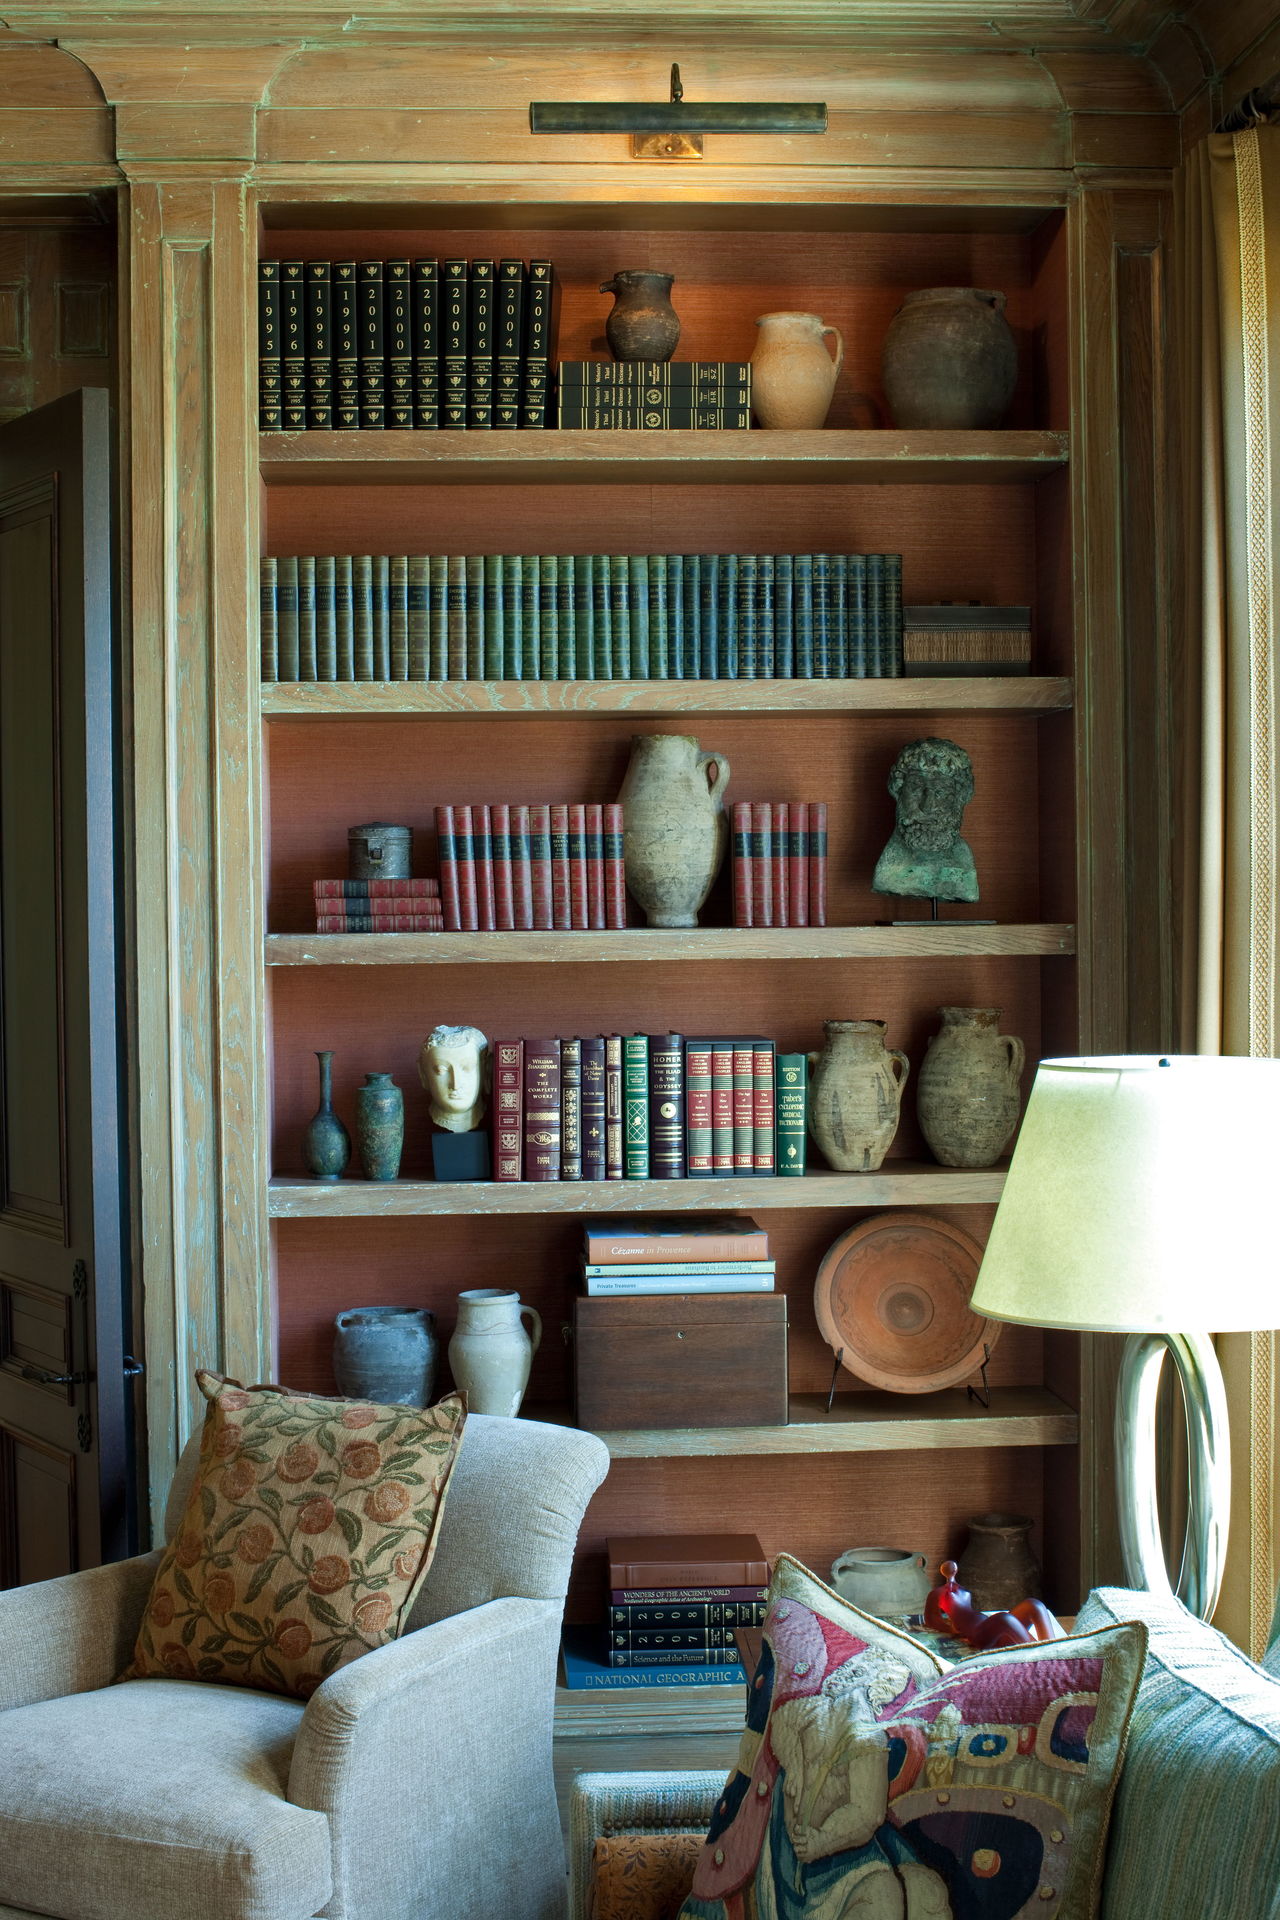 For a house in Potomac, Md., Jose Solis Betancourt and Paul Sherrill chose a copper-colored grasscloth from Maya Romanoff to set off this collection of books, ceramics and sculptures.